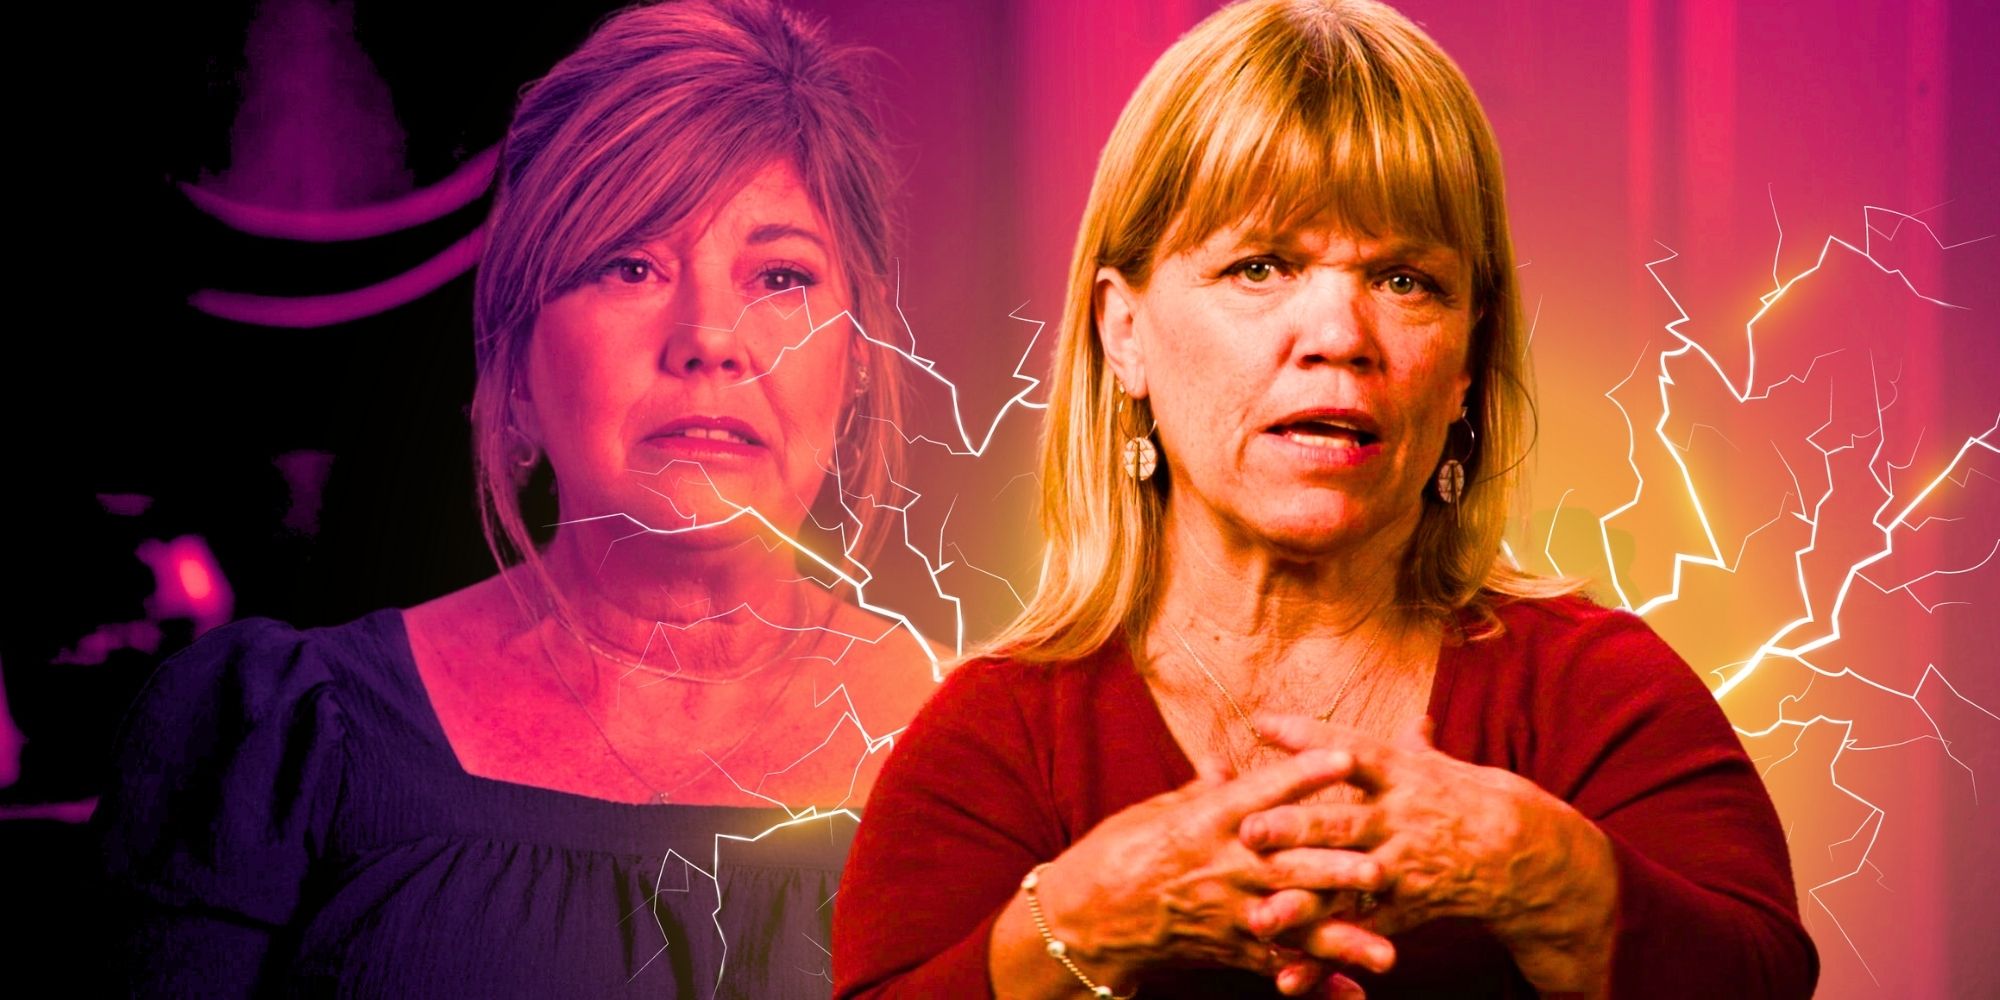 Little People, Big World's Amy Roloff & Caryn Chandler looking serious, with lighting bolts behind Amy